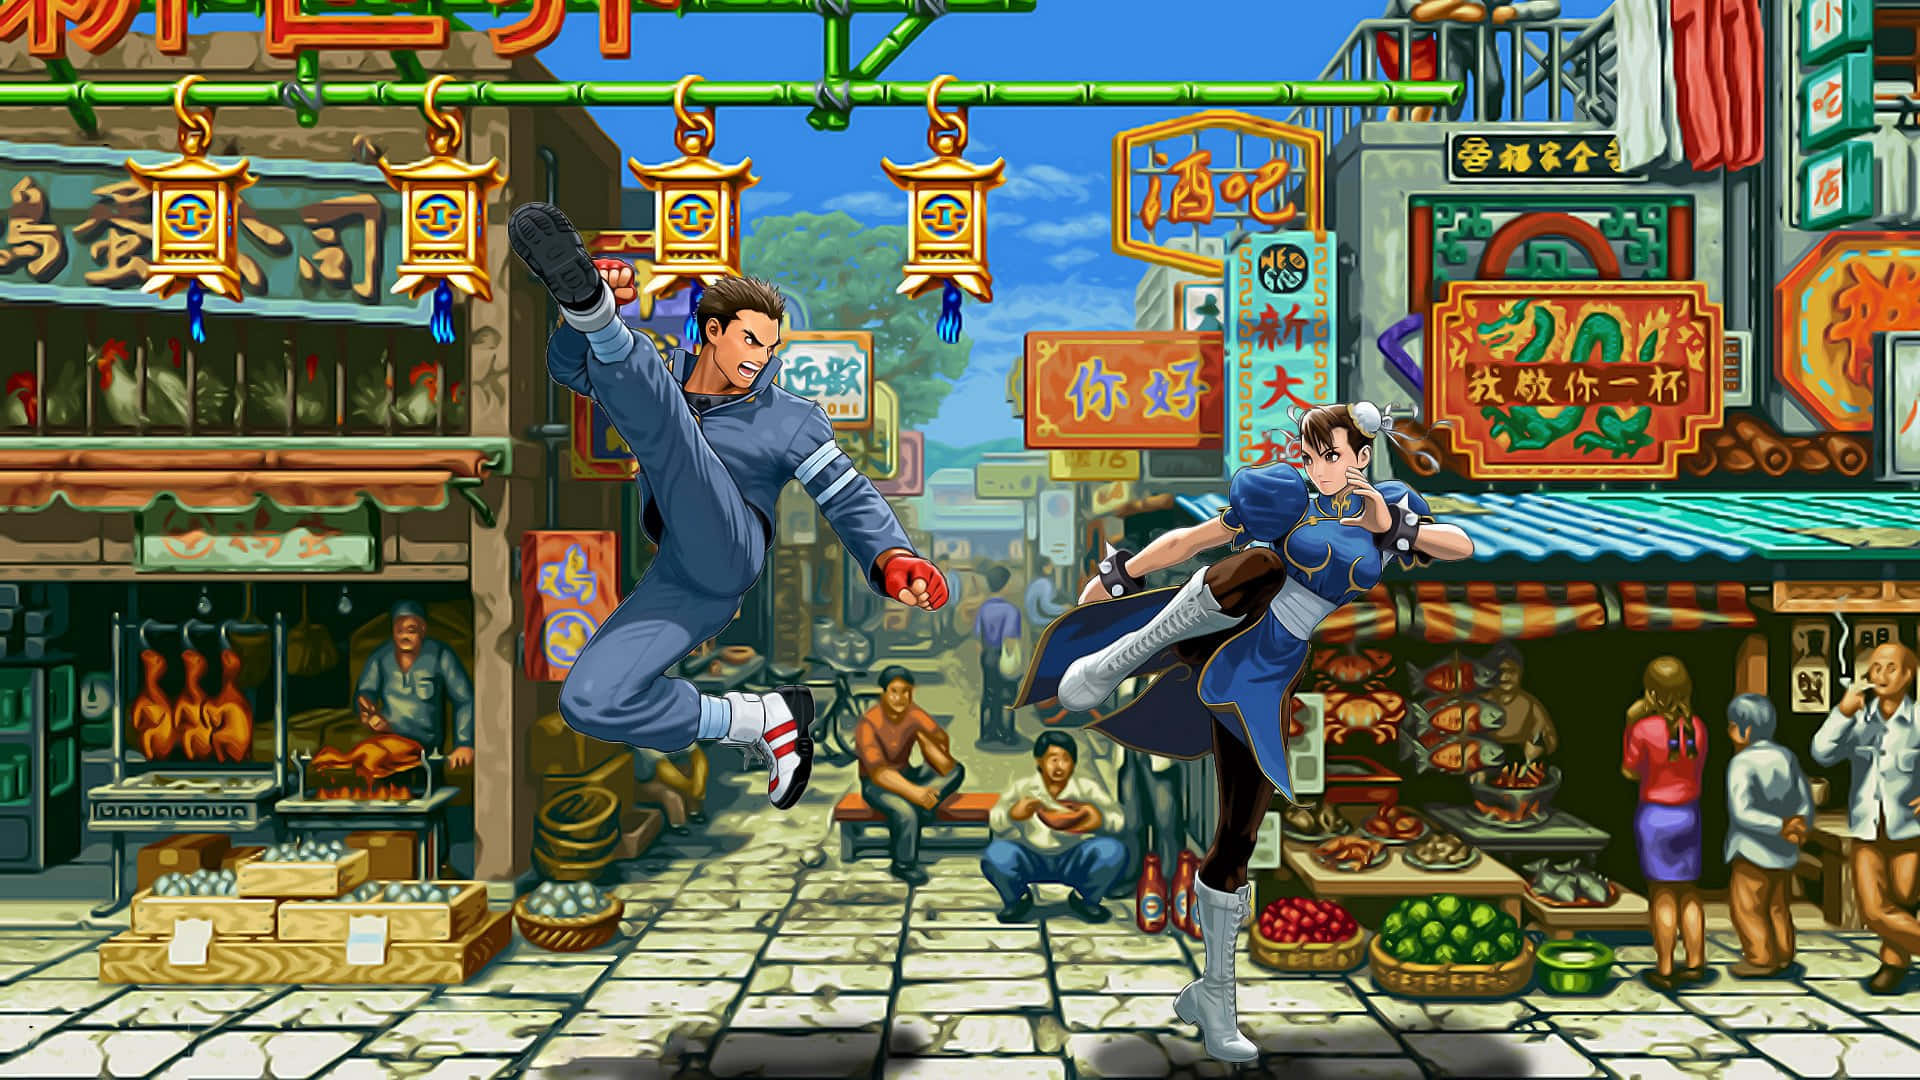 Show Your Skills in Street Fighter